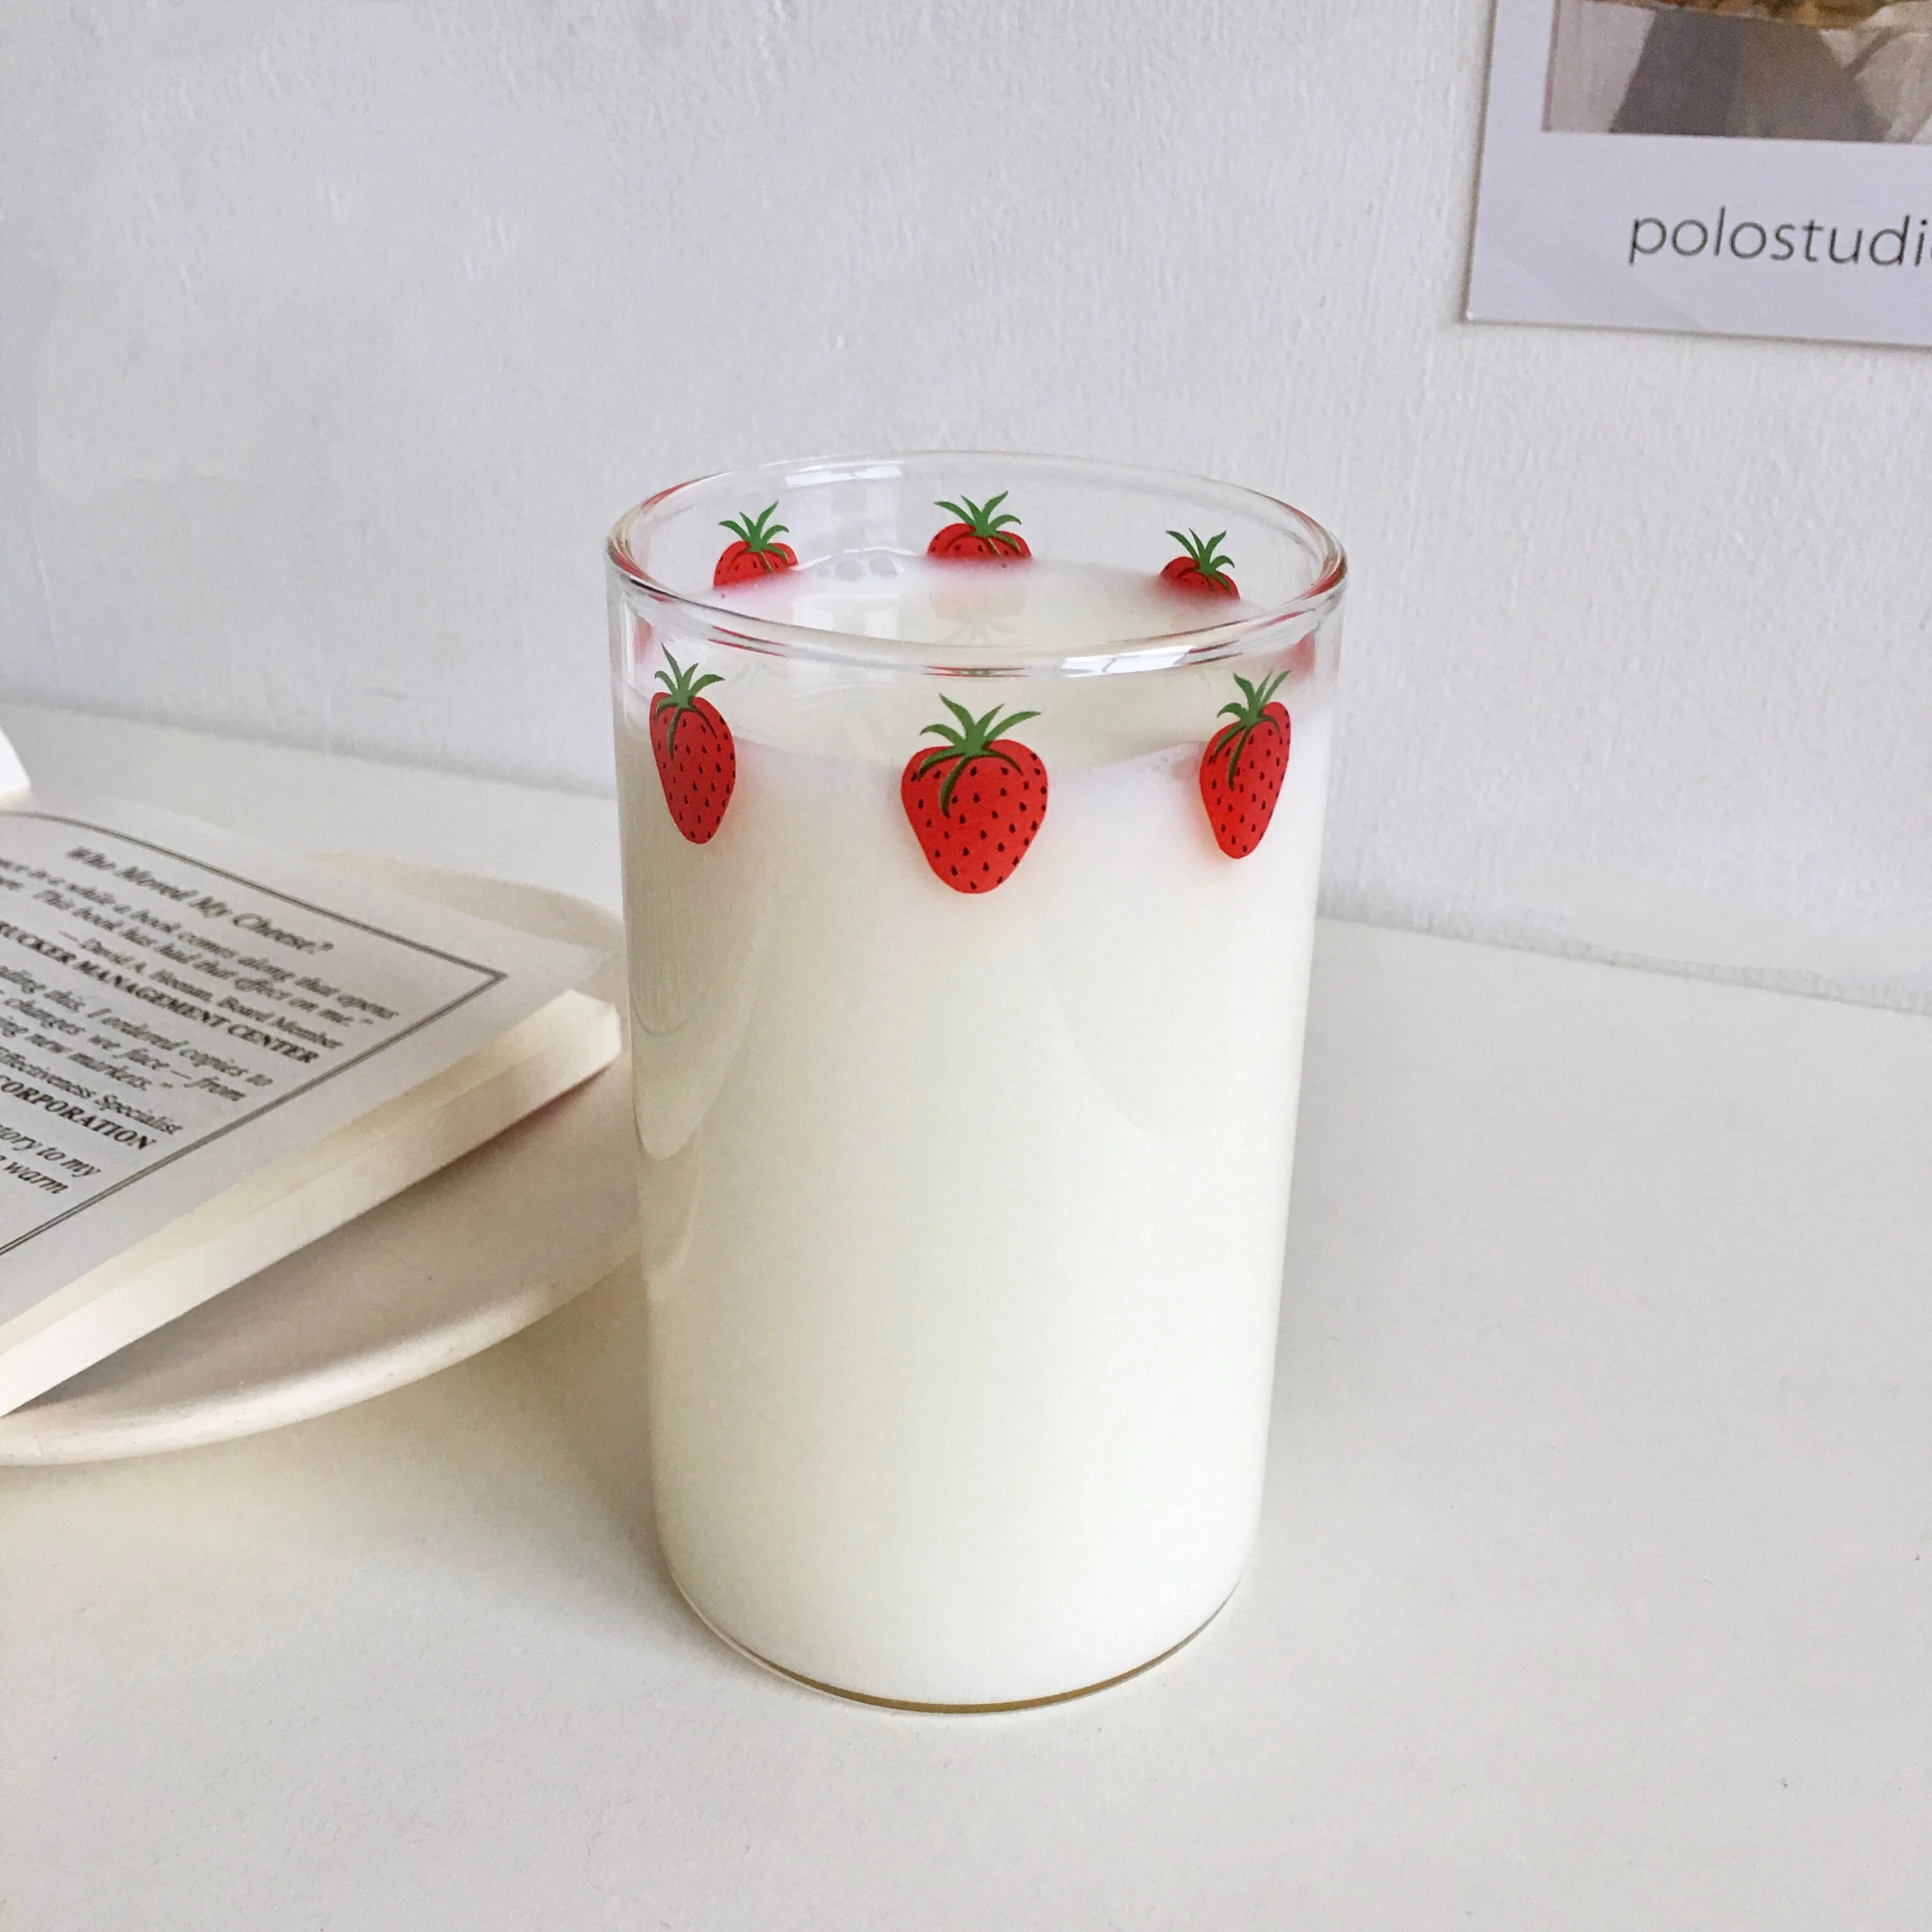 https://ae01.alicdn.com/kf/H12e1db6b64204016a0a68c79ed749bf7d/300ml-Strawberry-Cute-Glass-Cup-With-Straw-Creative-Transparent-Water-Cup-Student-Milk-Heat-Resistant-Glass.jpg